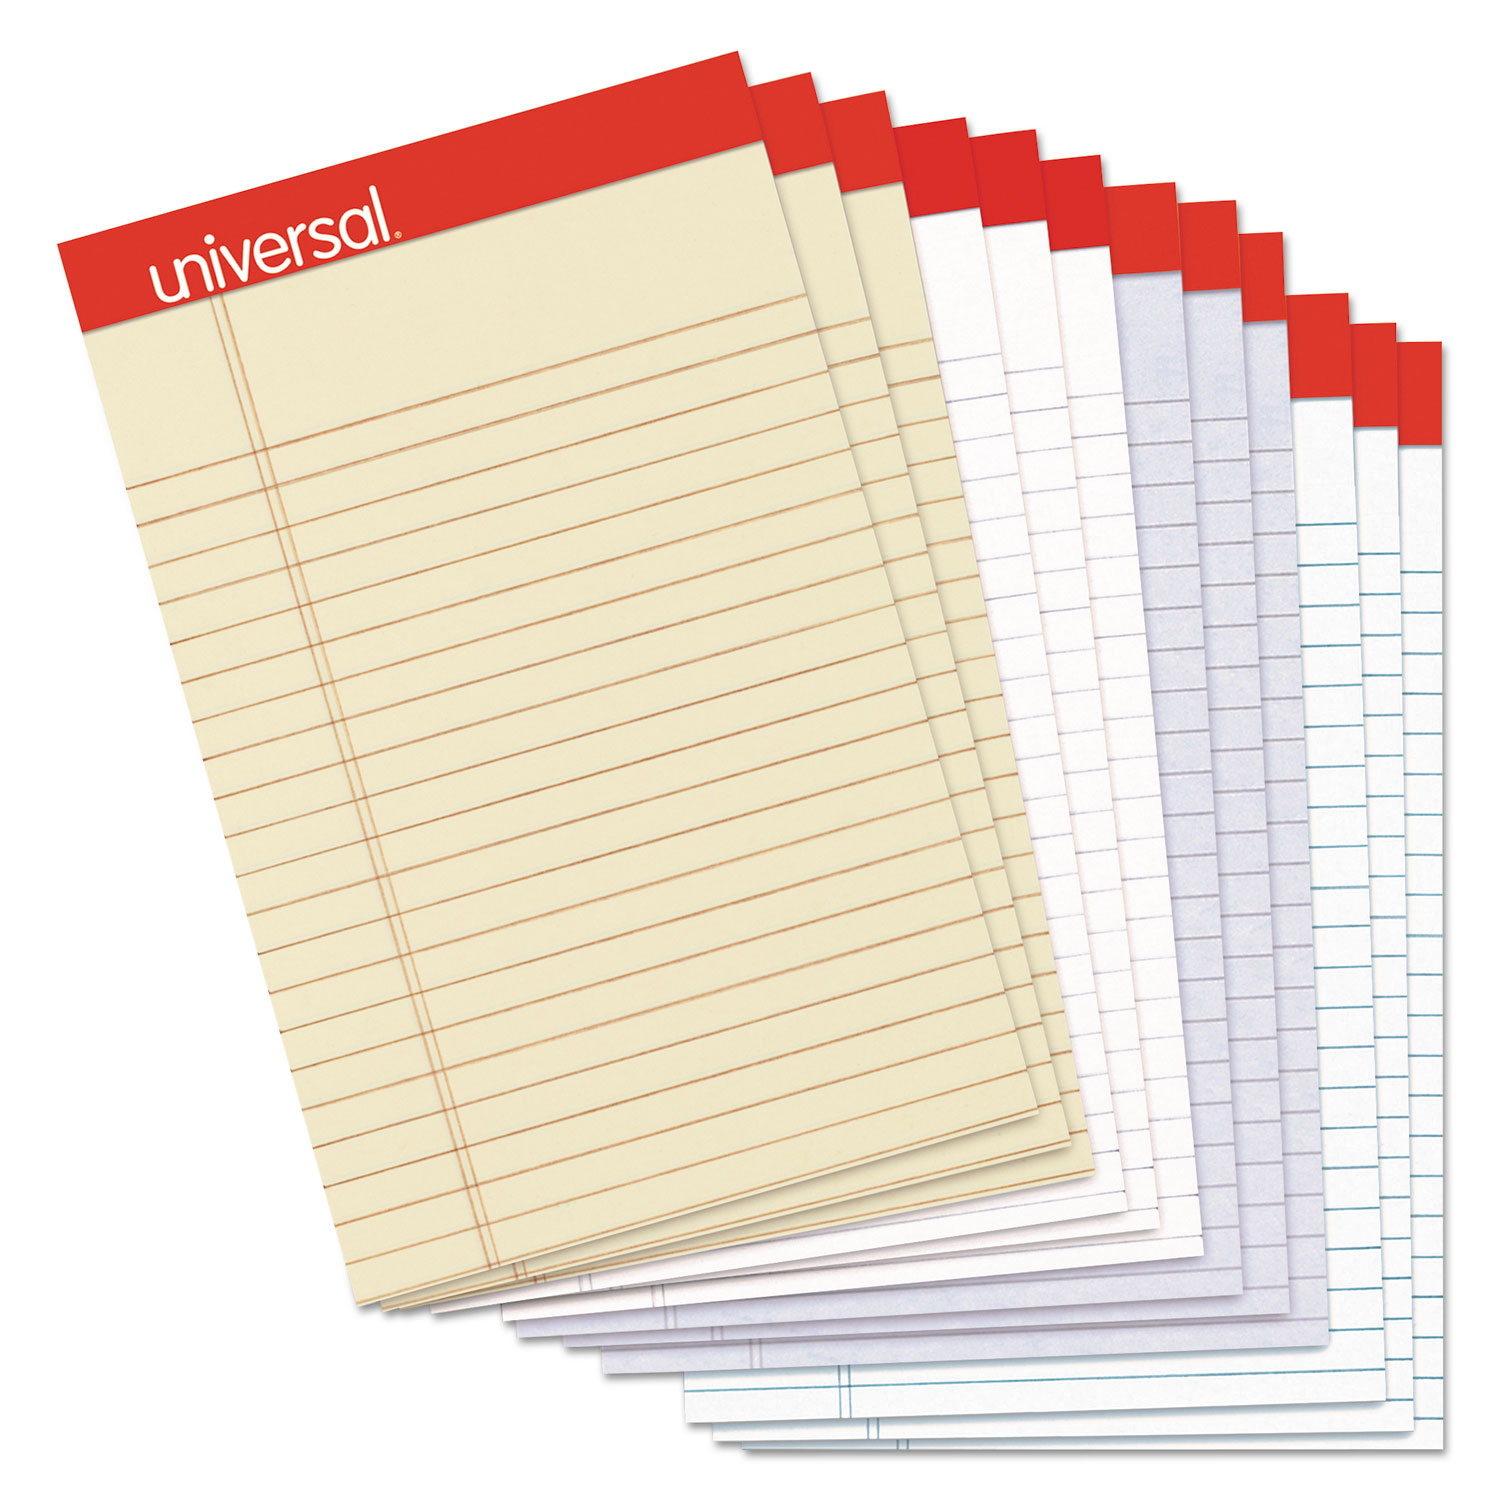  Universal UNV35855 Colored Perforated Writing Pads, Narrow Rule, 5 x 8, Assorted Sheet Colors, 50 Sheets, Dozen (UNV35855) 